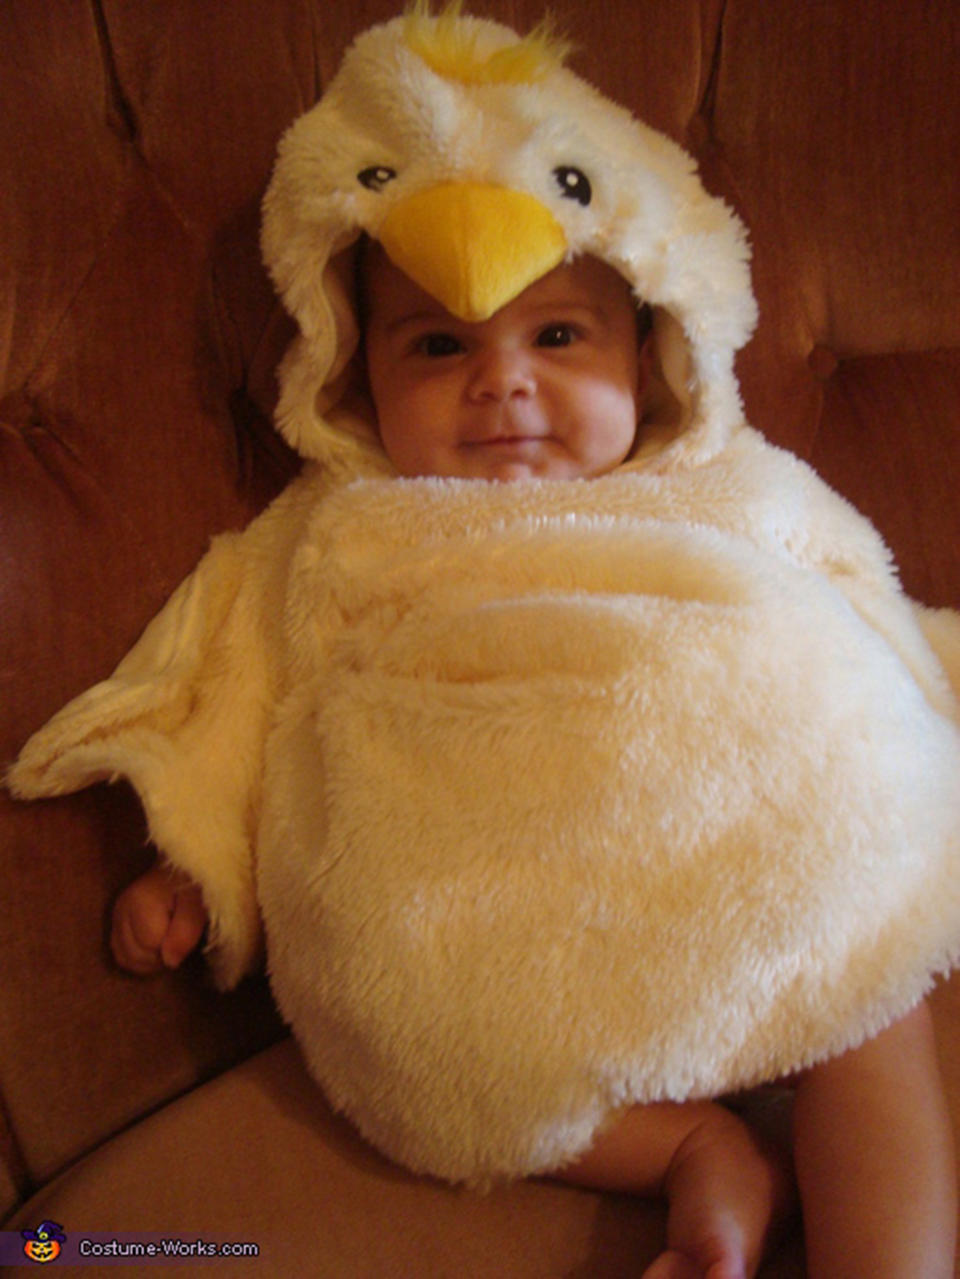 <a href="http://www.costume-works.com/costumes_for_babies/little_chicken1.html" target="_blank">via Costume Works</a>